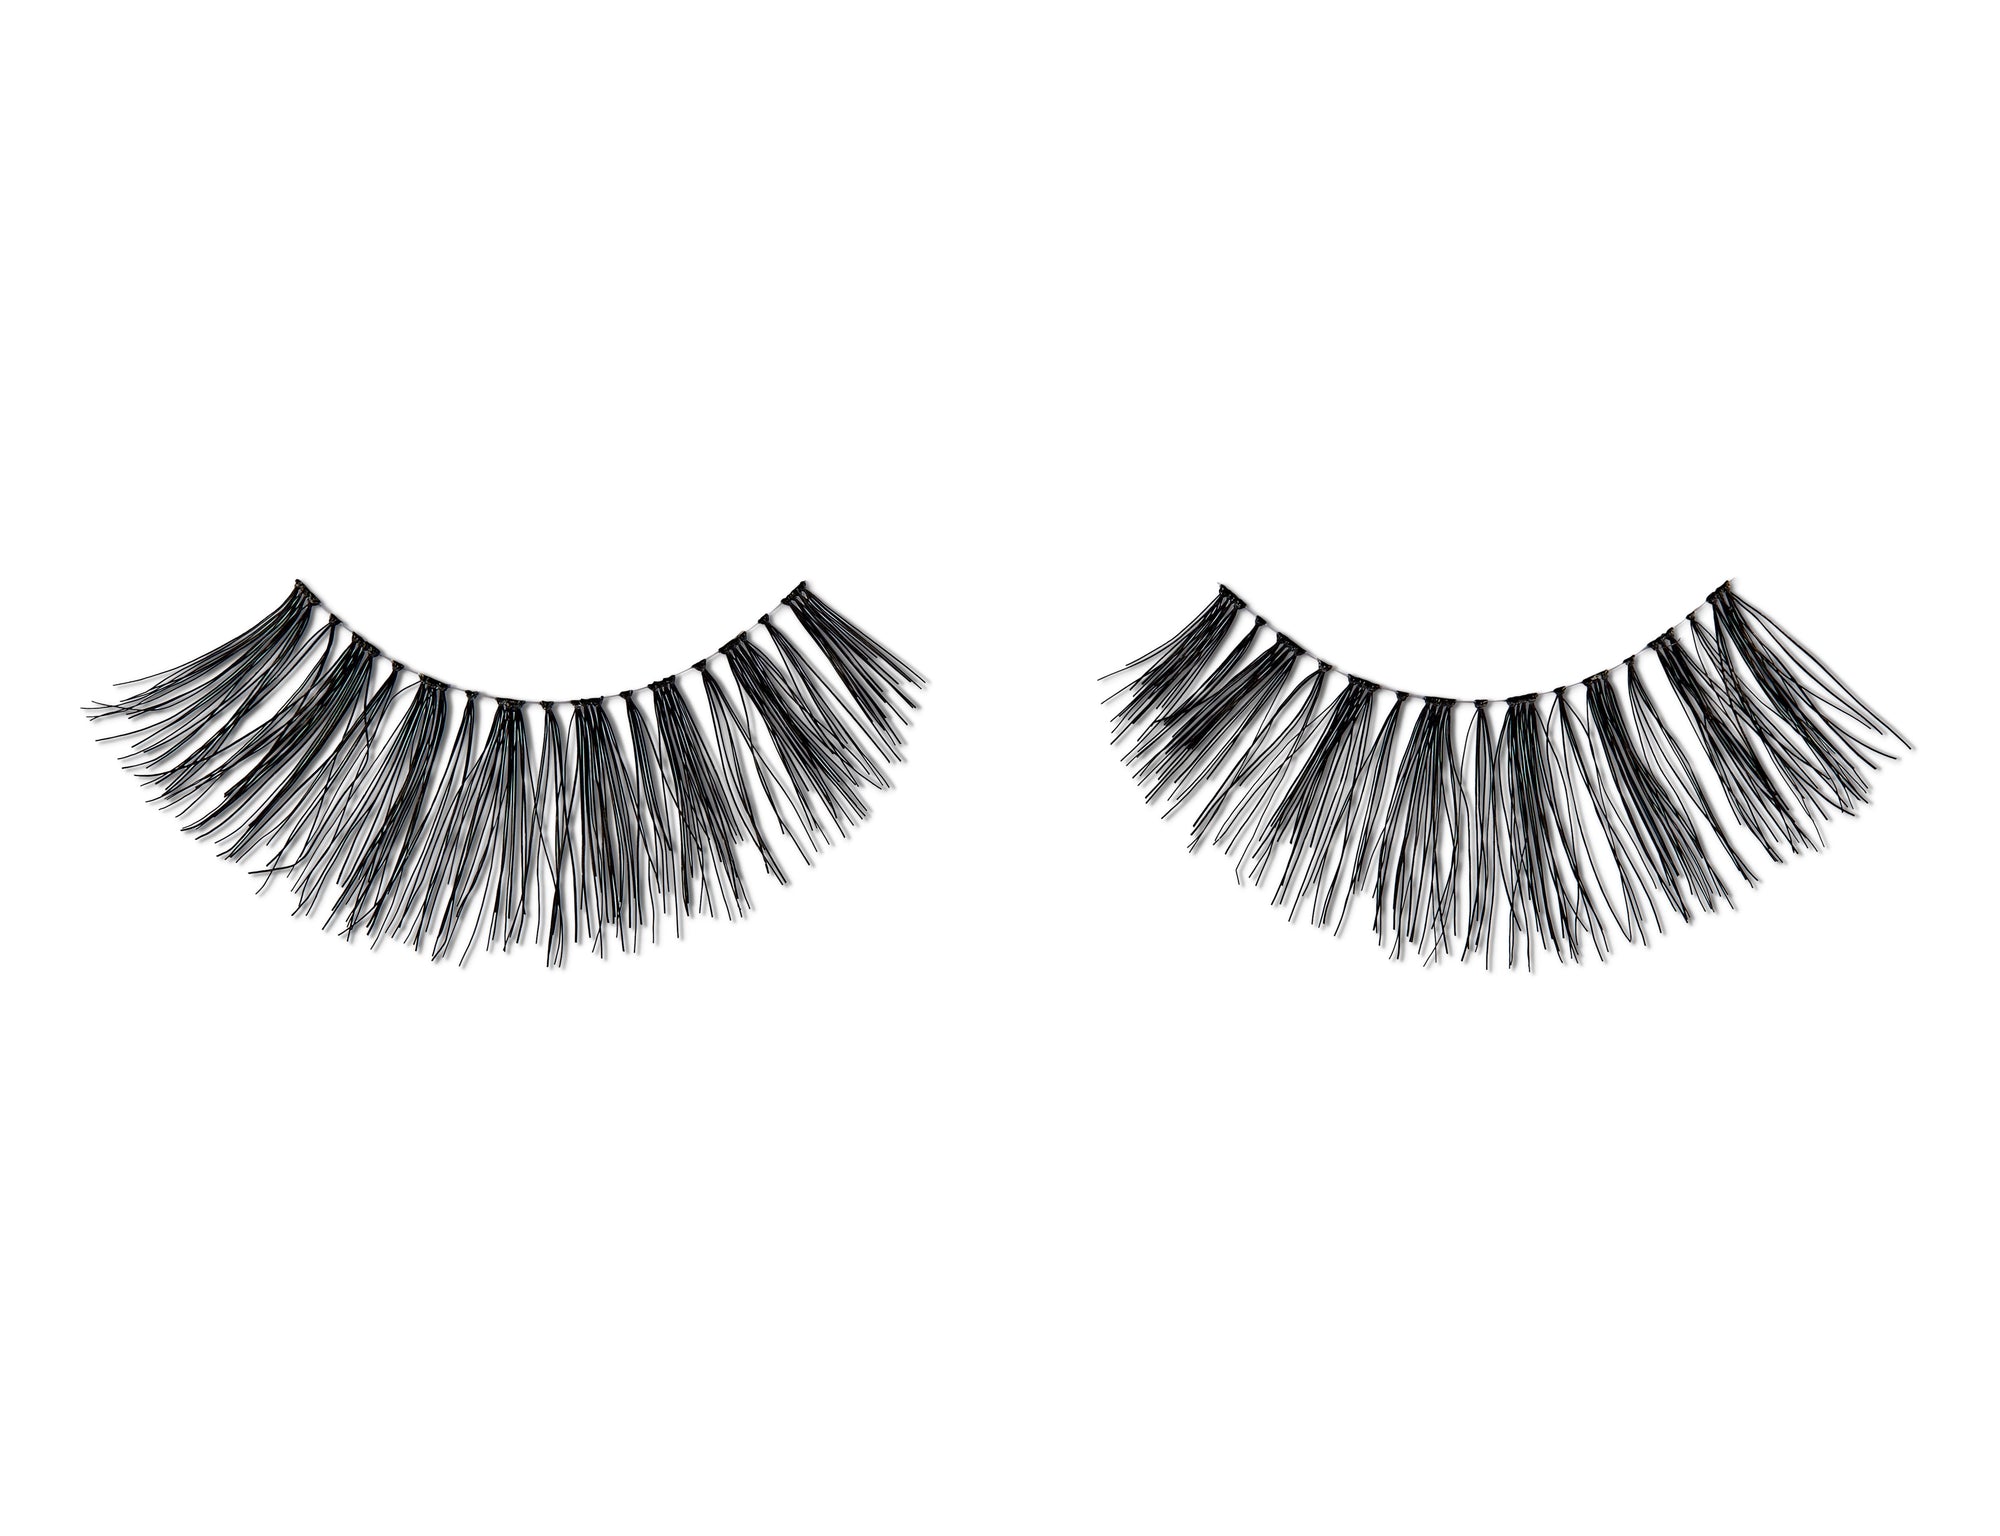 GladGirl False Lashes Bundle - For Your Lashes Only